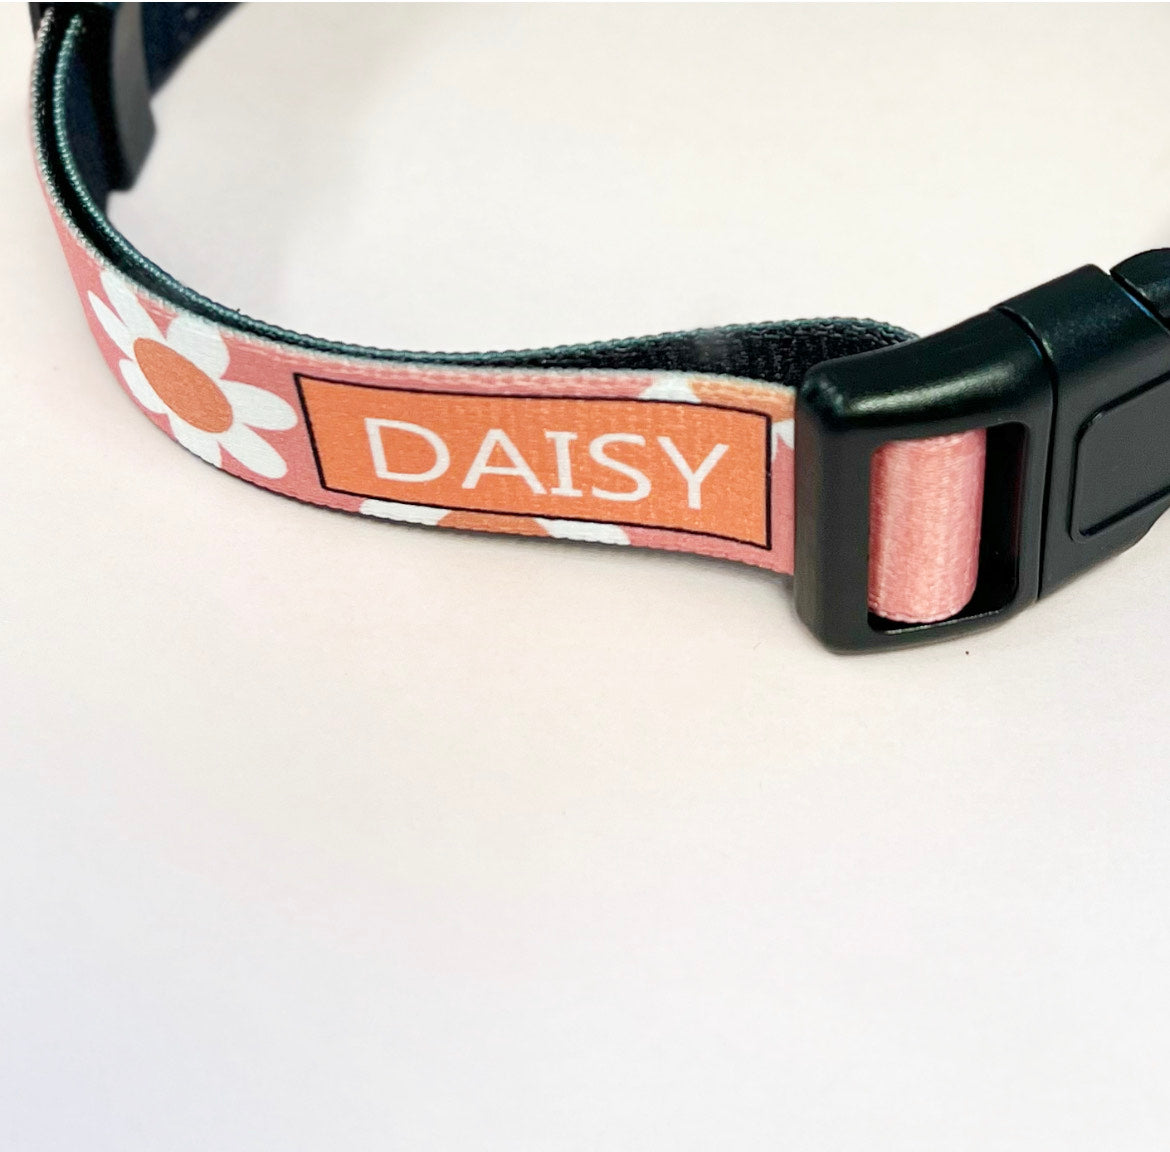 Personalised Pet Collar - Daisy Print - Add your Pets Name